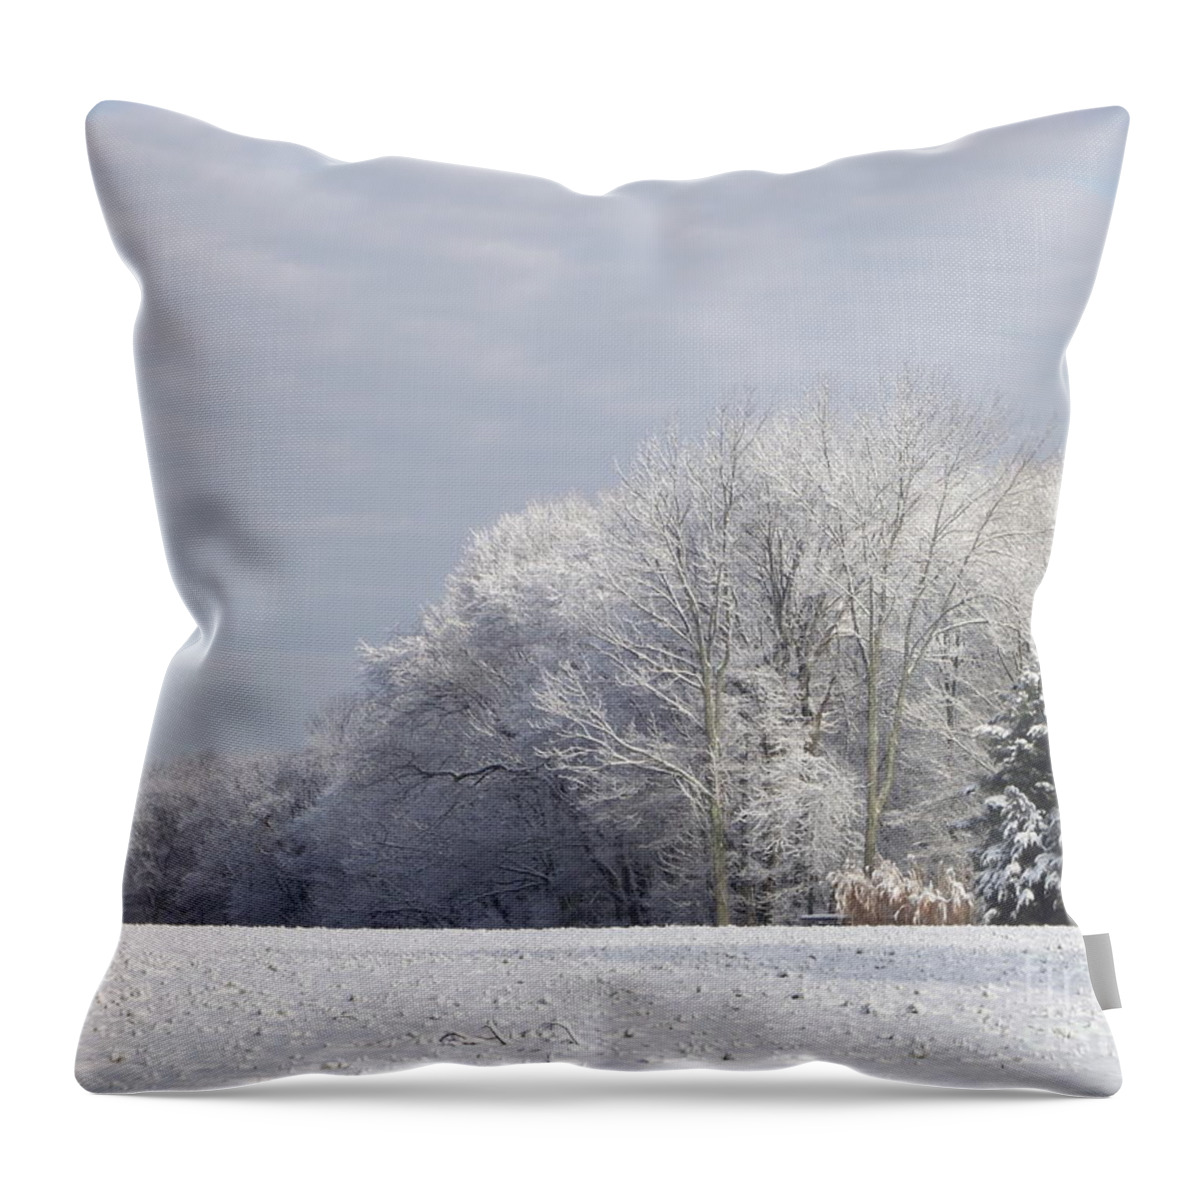 Winter Landscape Throw Pillow featuring the photograph Winter Serenity by Michelle Welles